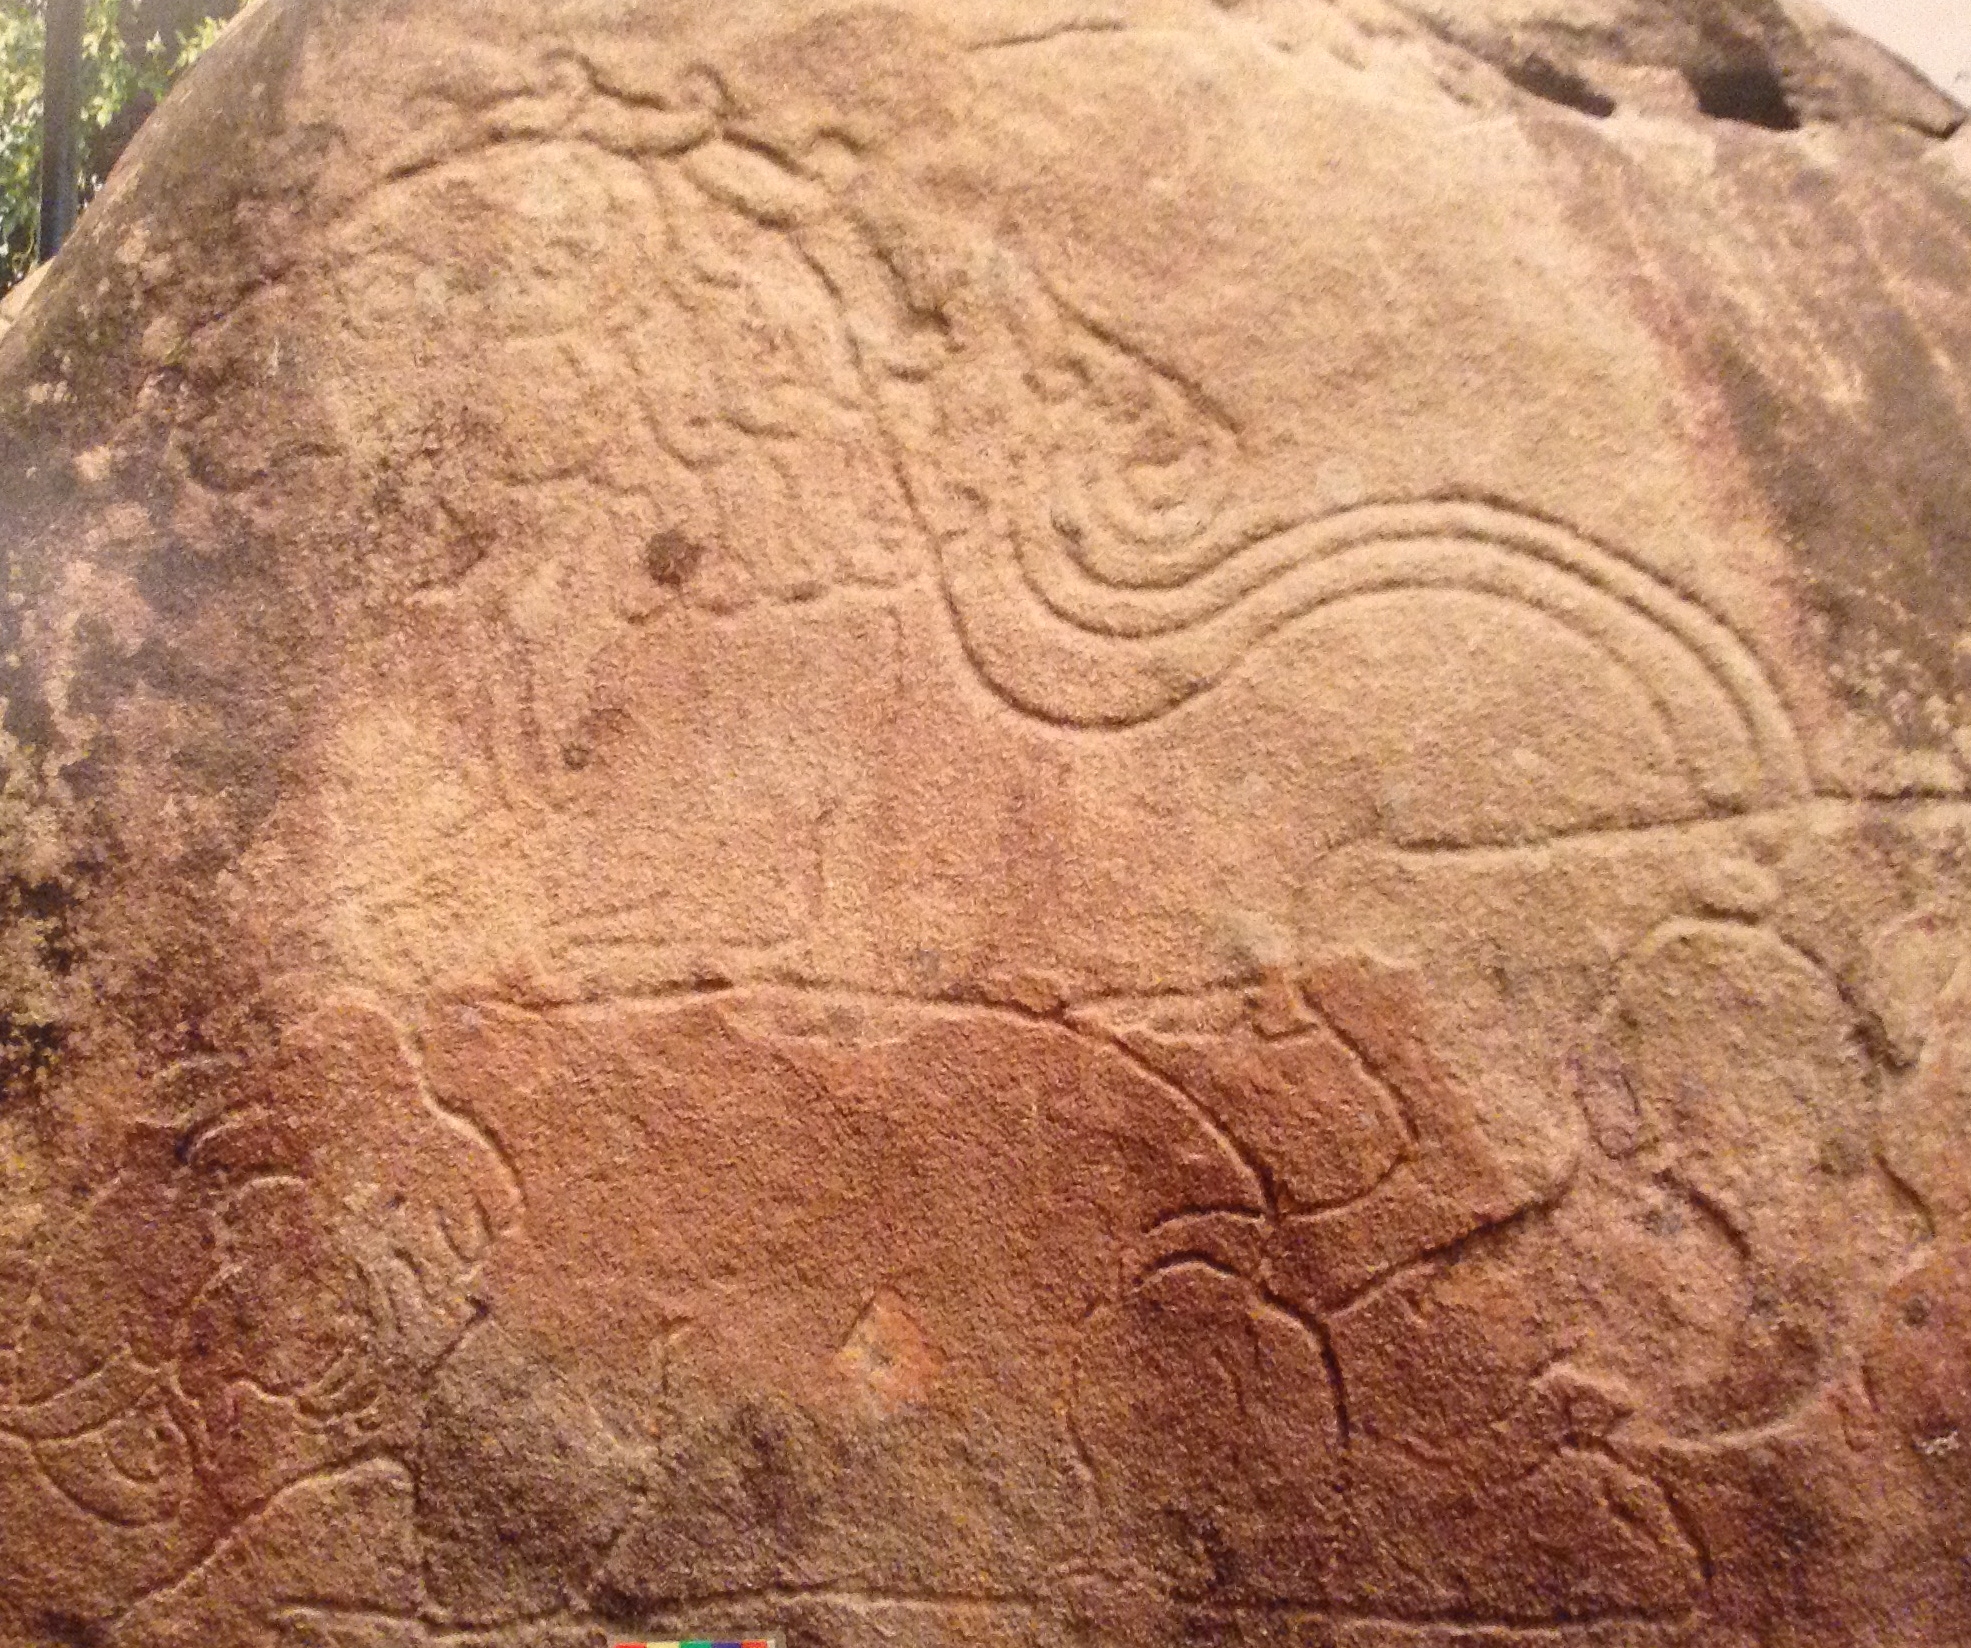 Animals - the lion and the elephant, carved on rocks